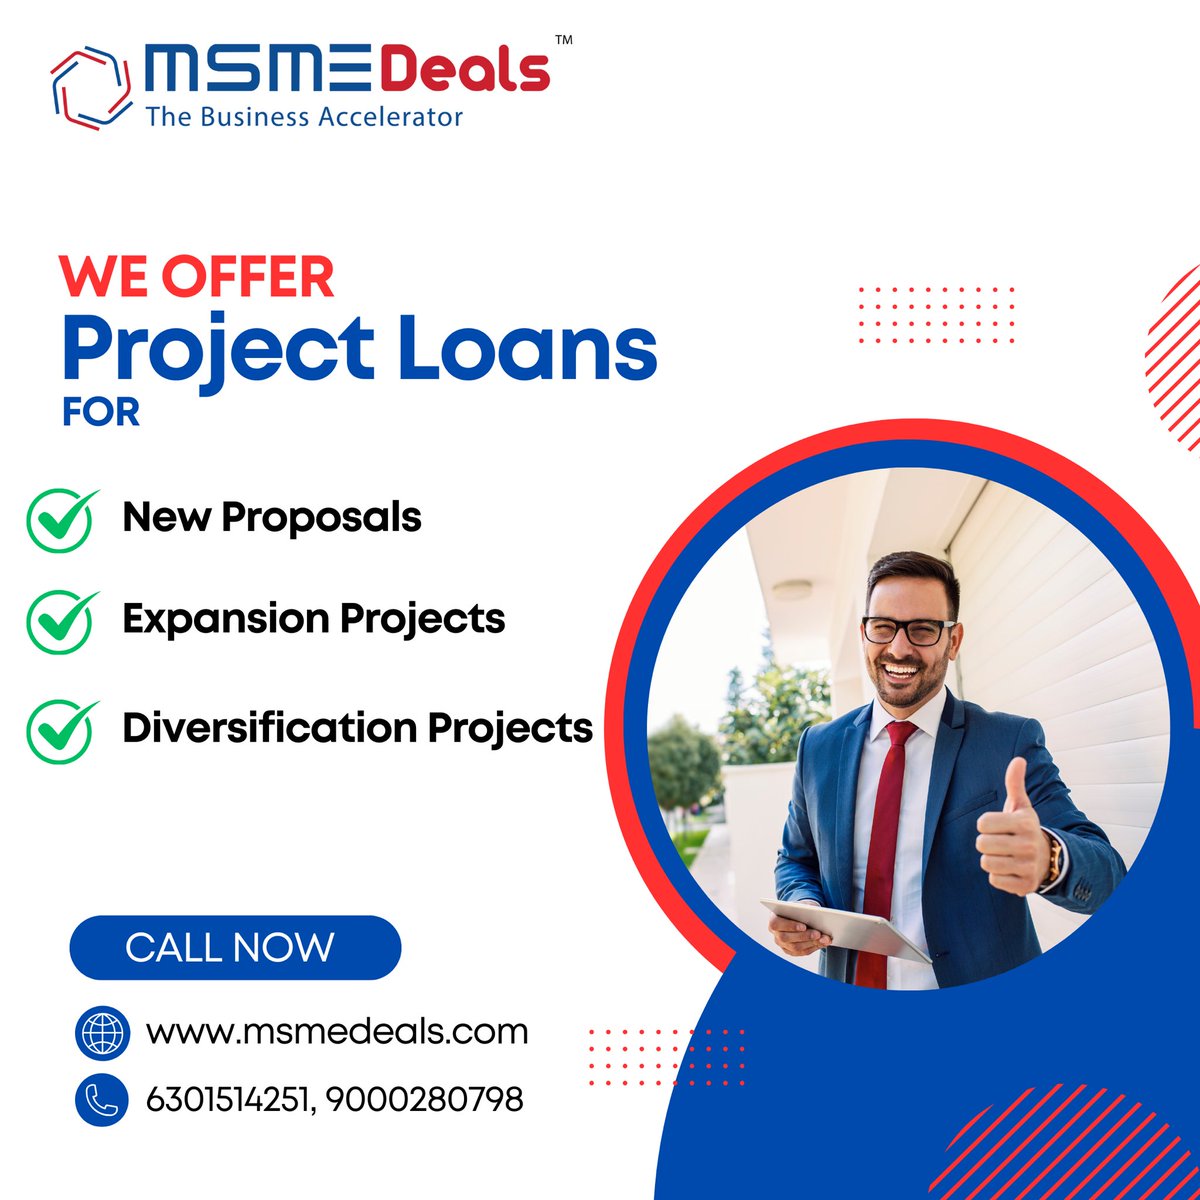 We are offering project loans

For more information, contact MSME

Deals

Website - msmedeals.com

Mail -support@msmedeals.com

Phone - 040- 40021994, 6301514251

#businessloan #capitalinvestment

#infrastructurefunding
#developmentfinance #commercialloan 
#construction